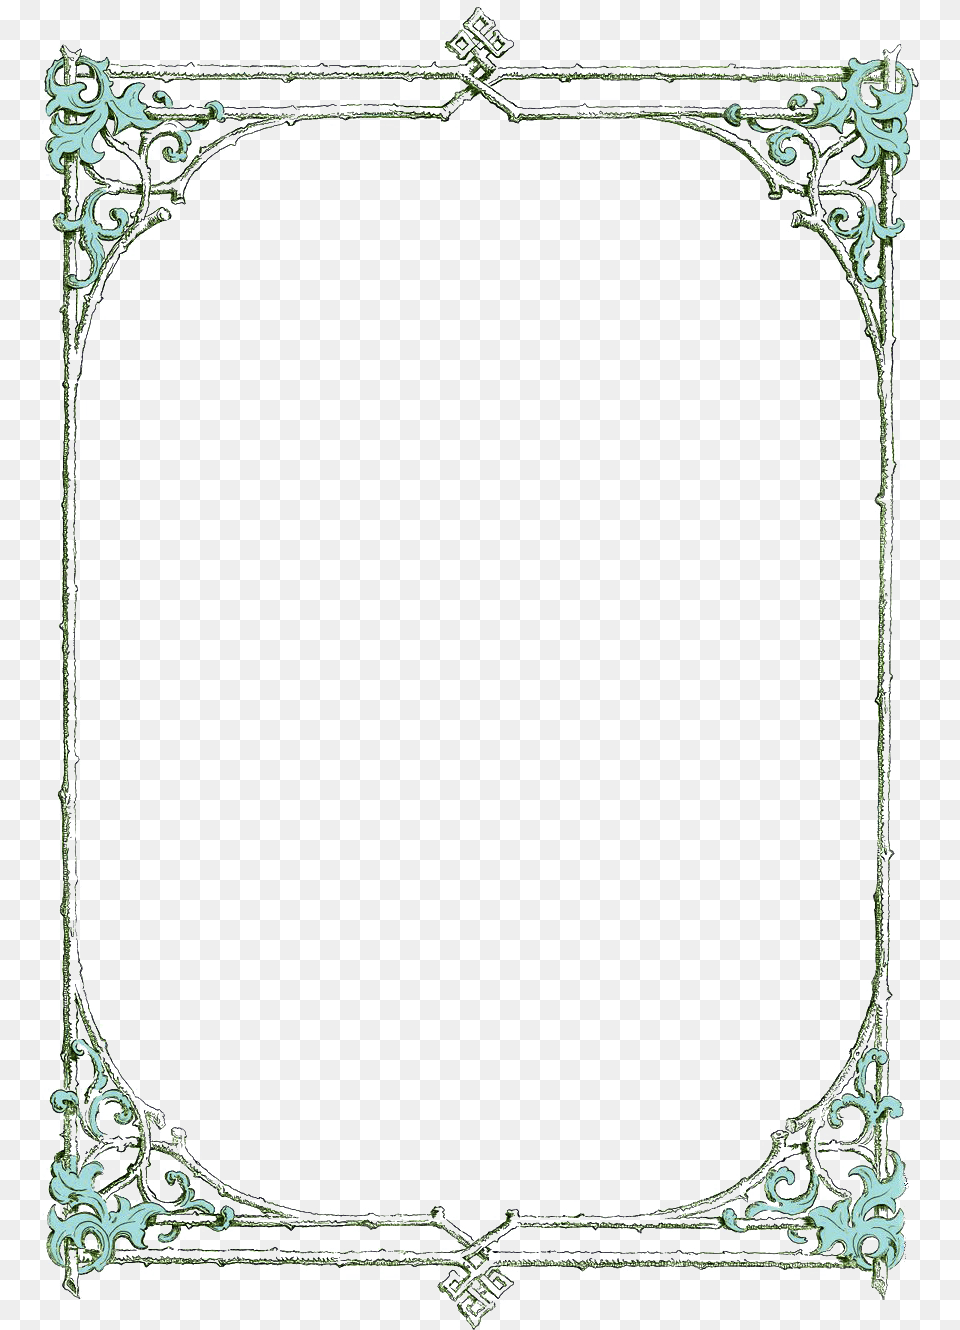 Leafy Clip Art Border From An Antique Book Clip Art Borders, Blackboard Png